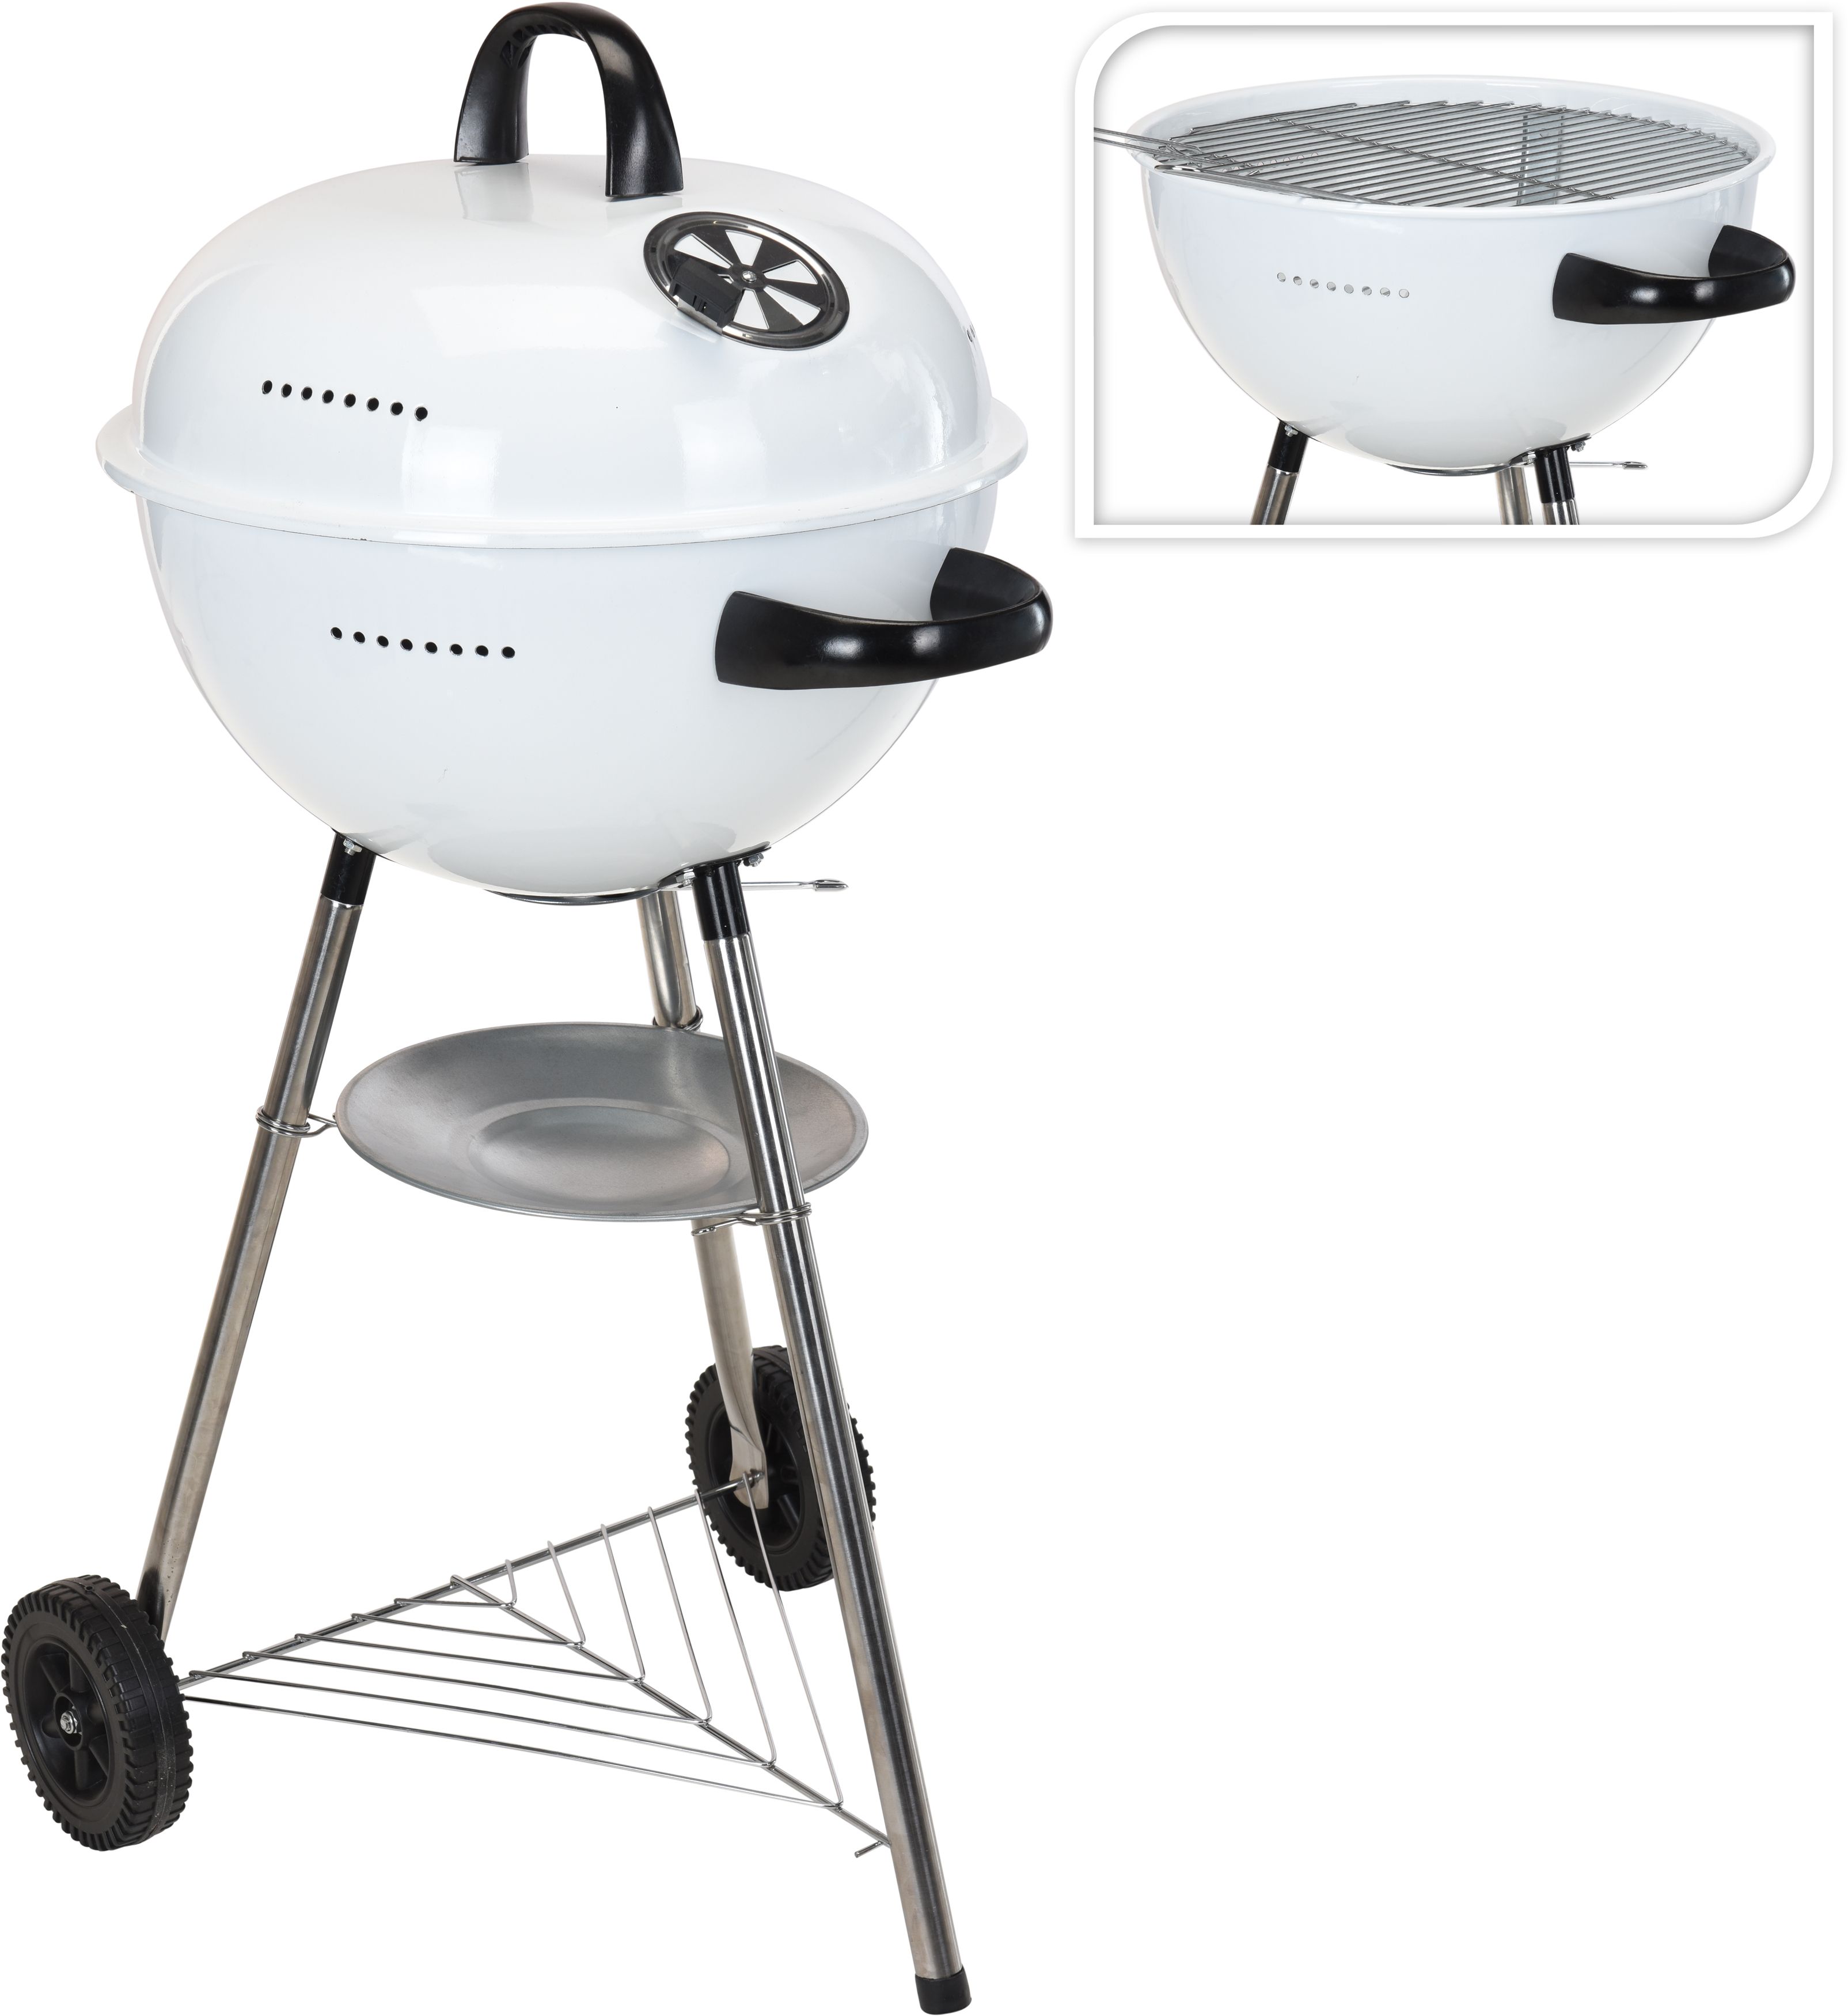 BBQ Barbecue Bolvormig 48cm Wit